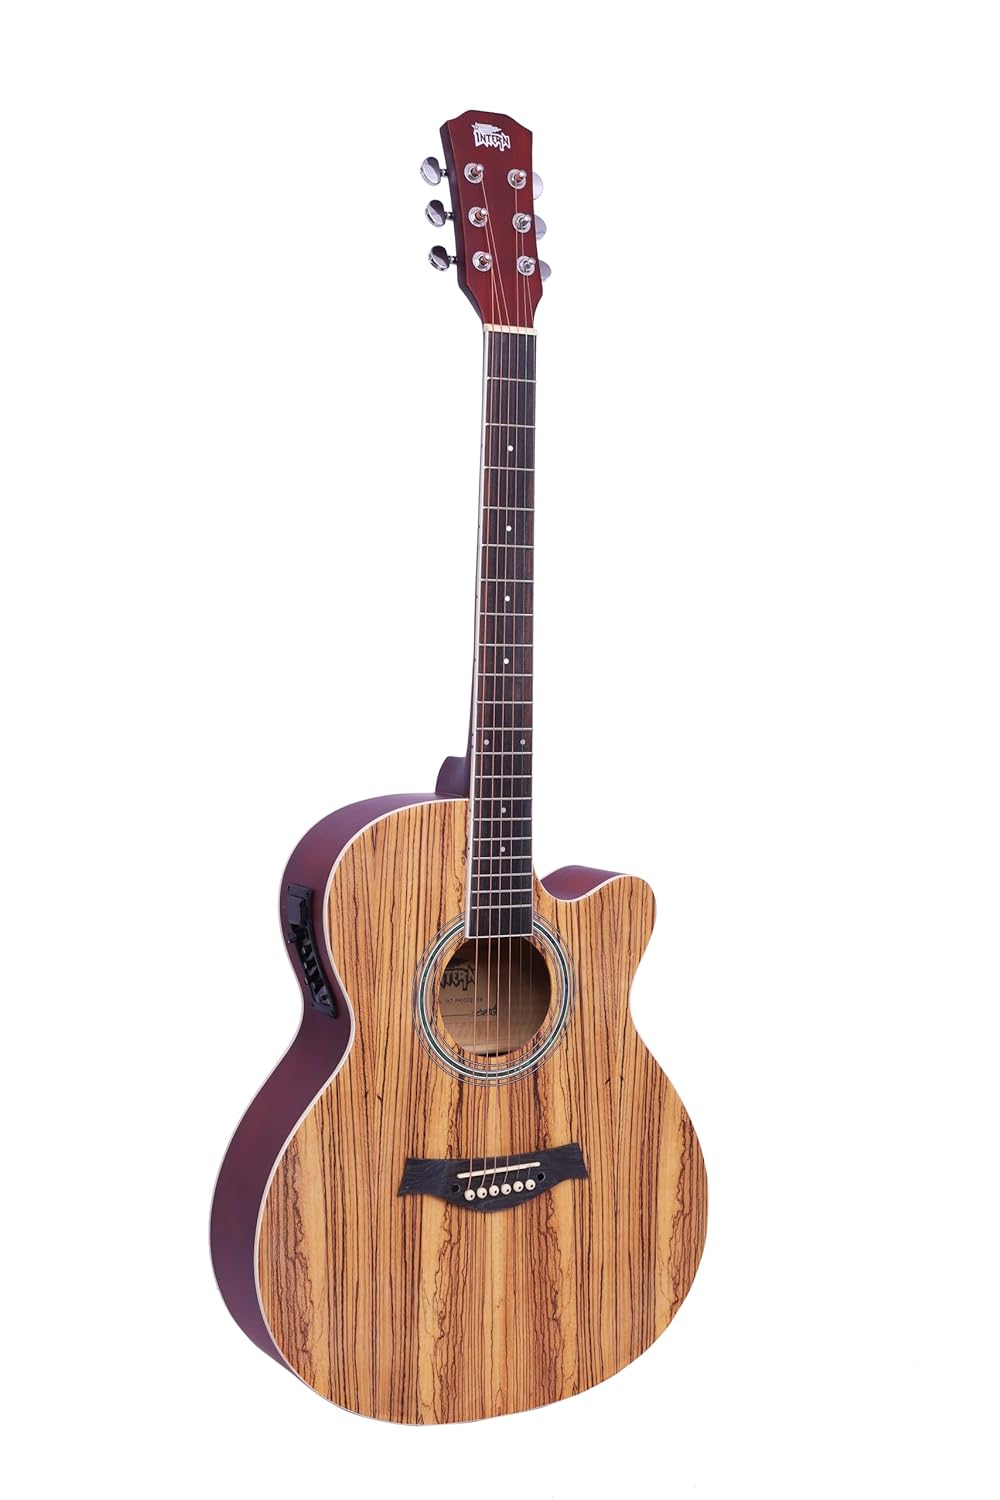 INTERN 40 inches Acoustic Guitar with Pick-up & truss rod, carry bag, strings pack, strap & picks. Premium Wooden durable built, Best tonal stability with professional sound amplificaiton. (ASH).